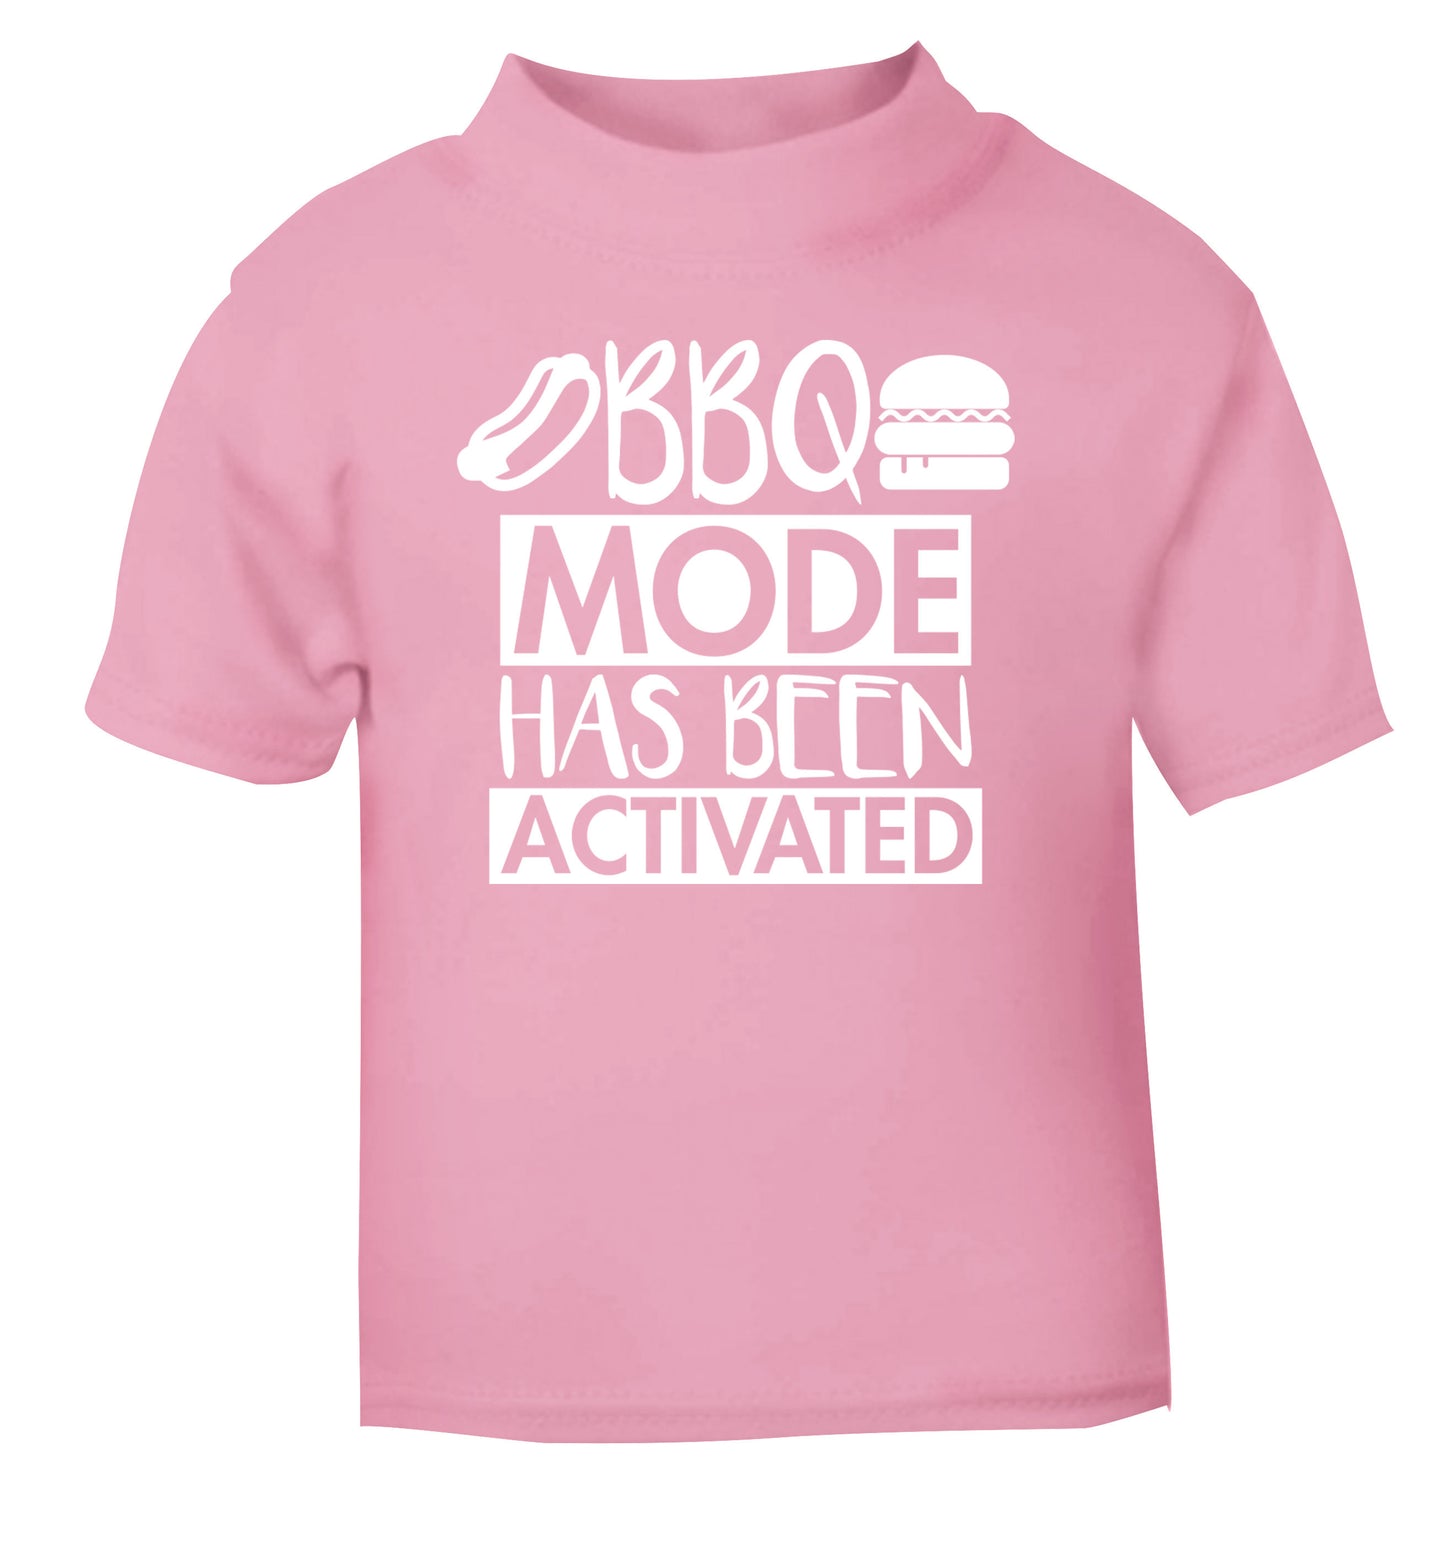 Bbq mode has been activated light pink Baby Toddler Tshirt 2 Years